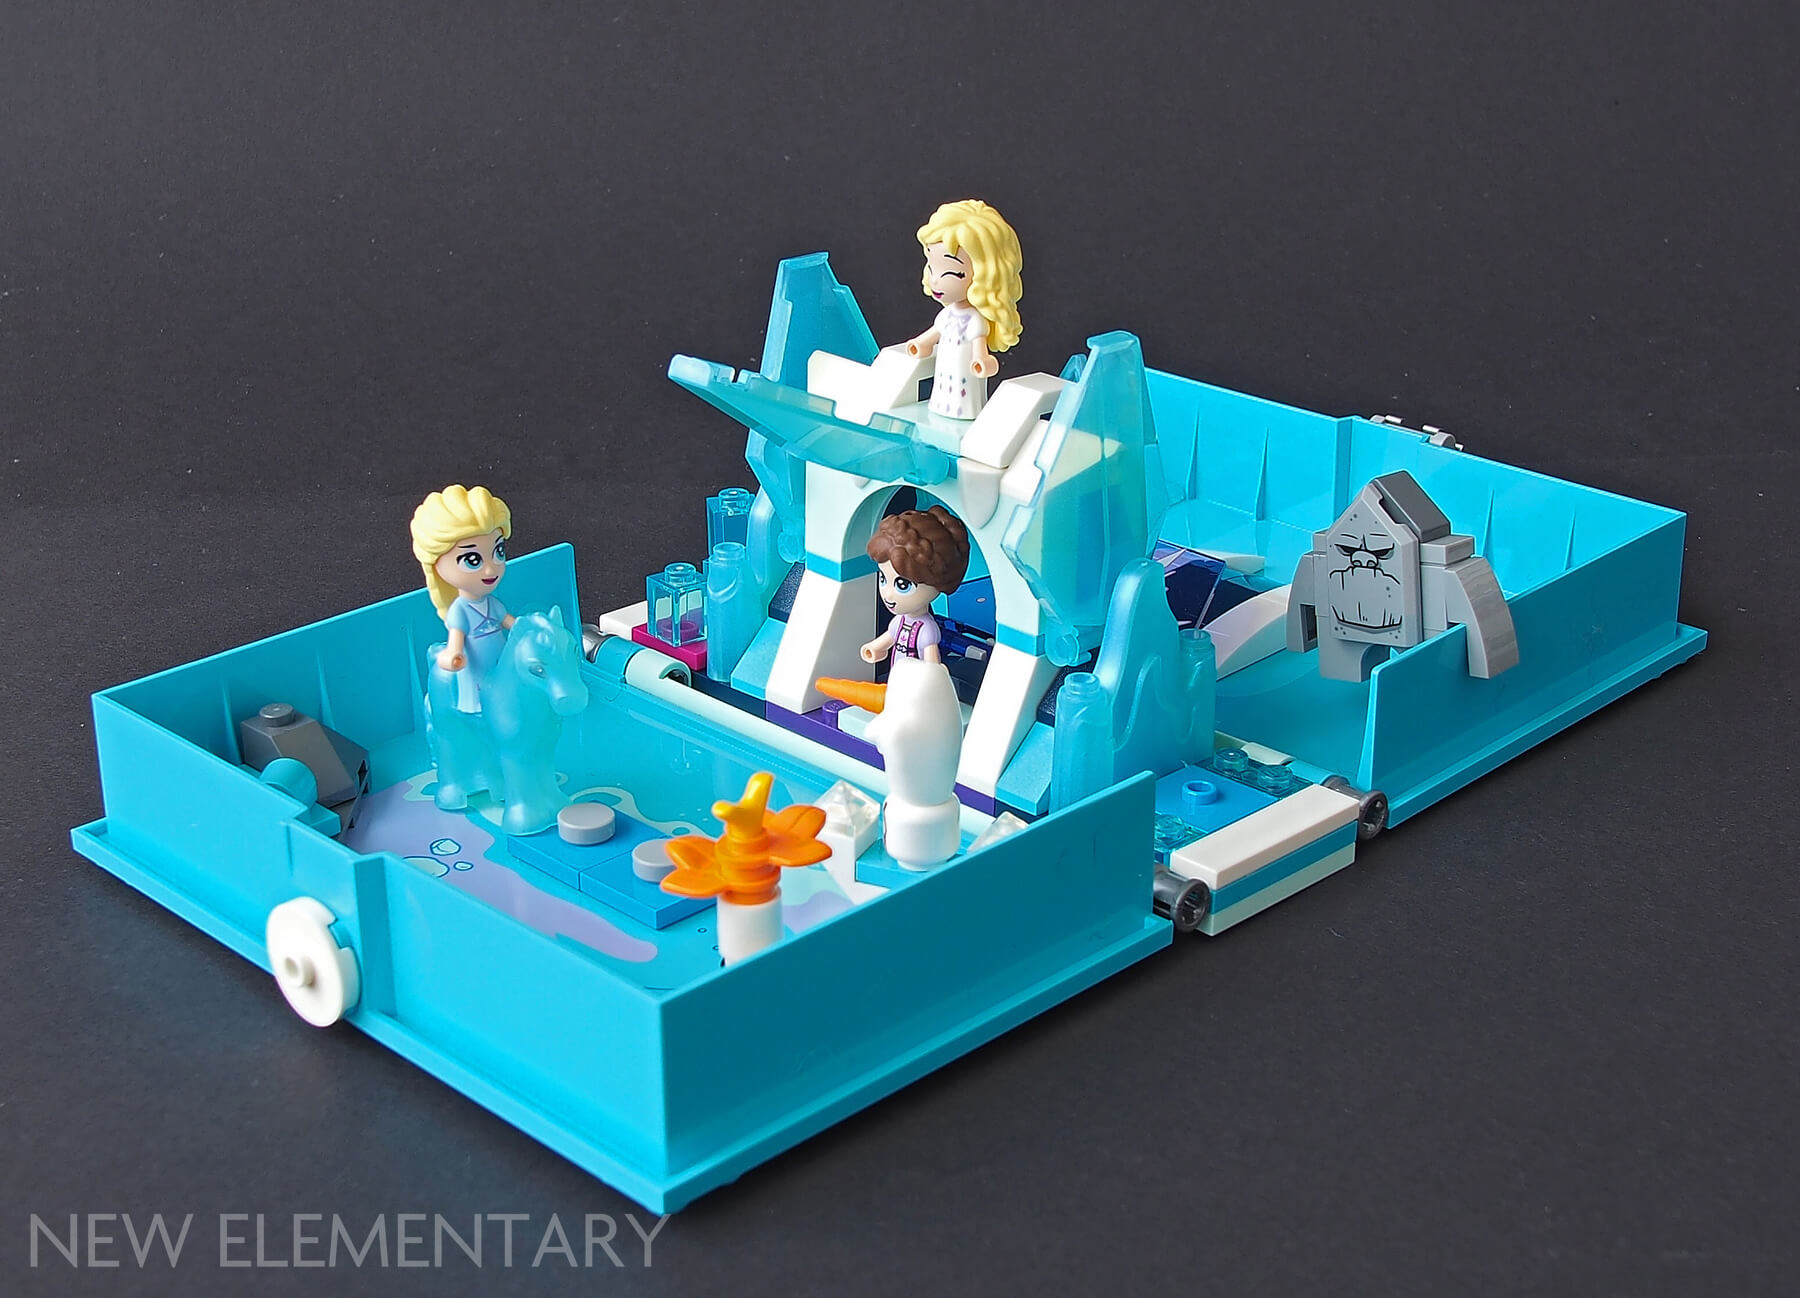 Lego Disney Review Moc 431 Elsa And The Nokk Storybook Adventures New Elementary Lego Parts Sets And Techniques